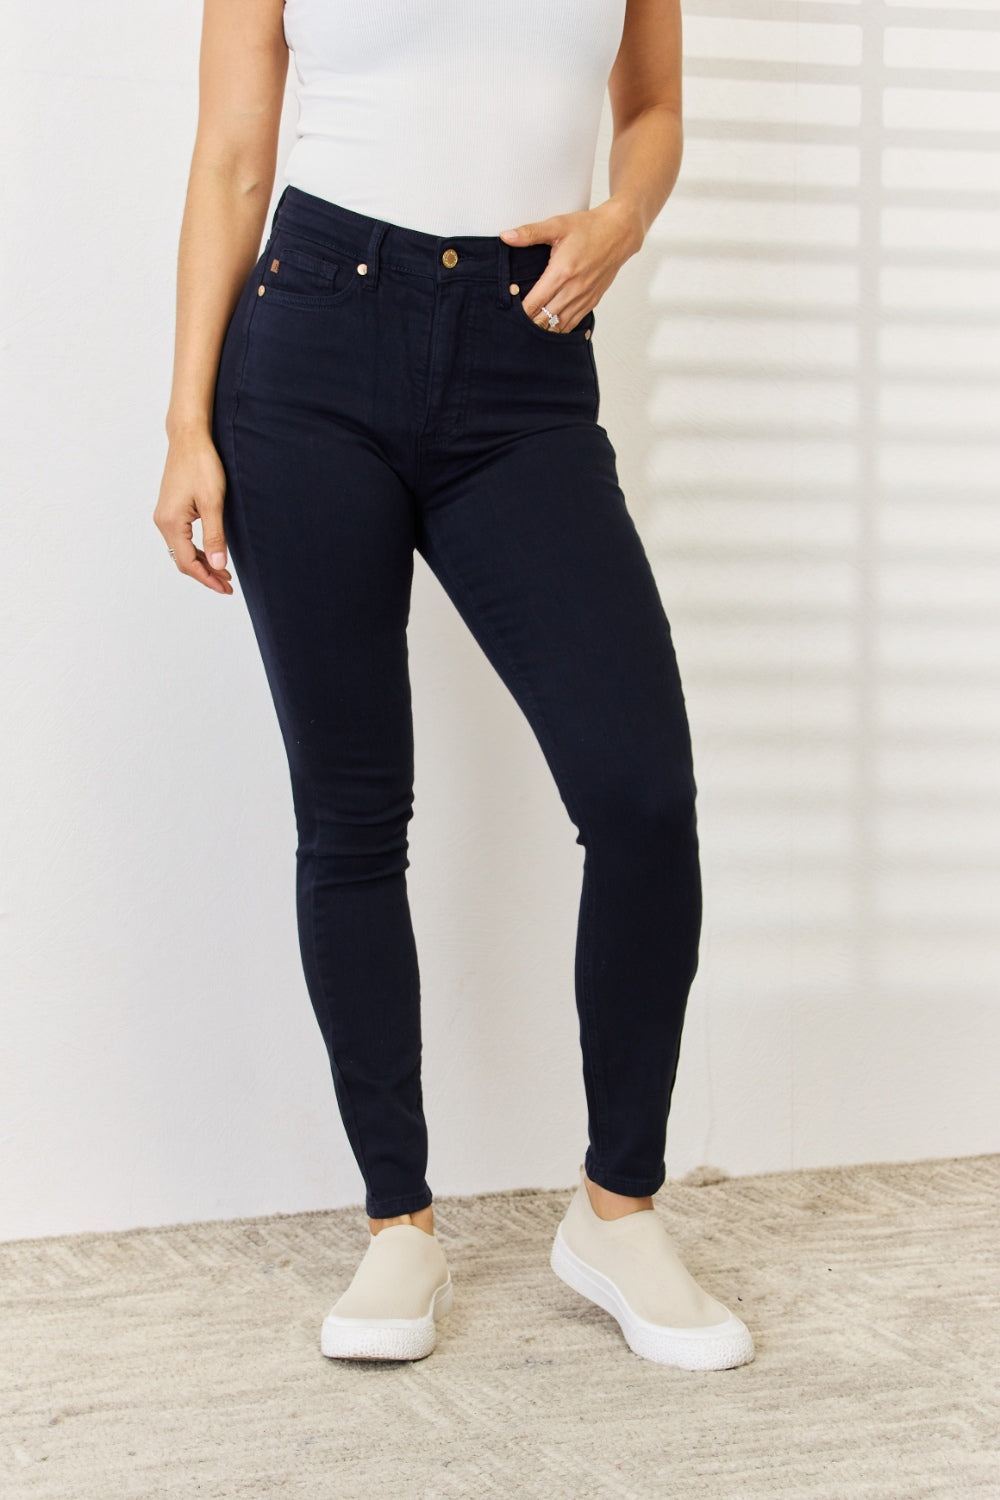 Judy Blue Tummy Control Navy Skinny Jeans - Inspired Eye Boutique